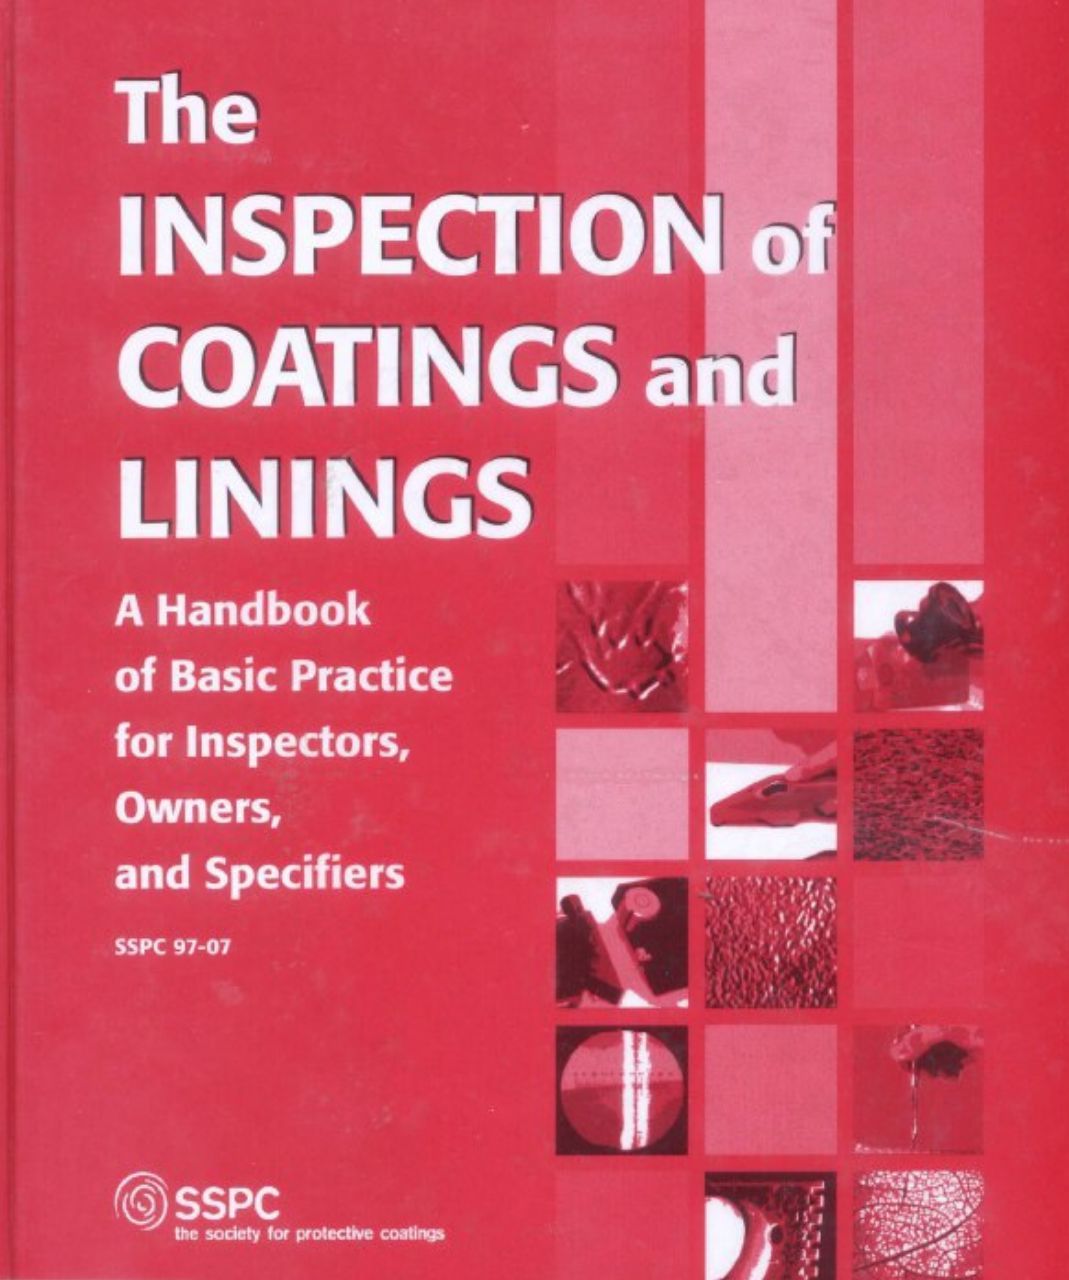 The Inspection Of Coatings And Linings, A Handbook Of Basic Practice For Inspectors, Owners, and Specifiers - Scanned Pdf